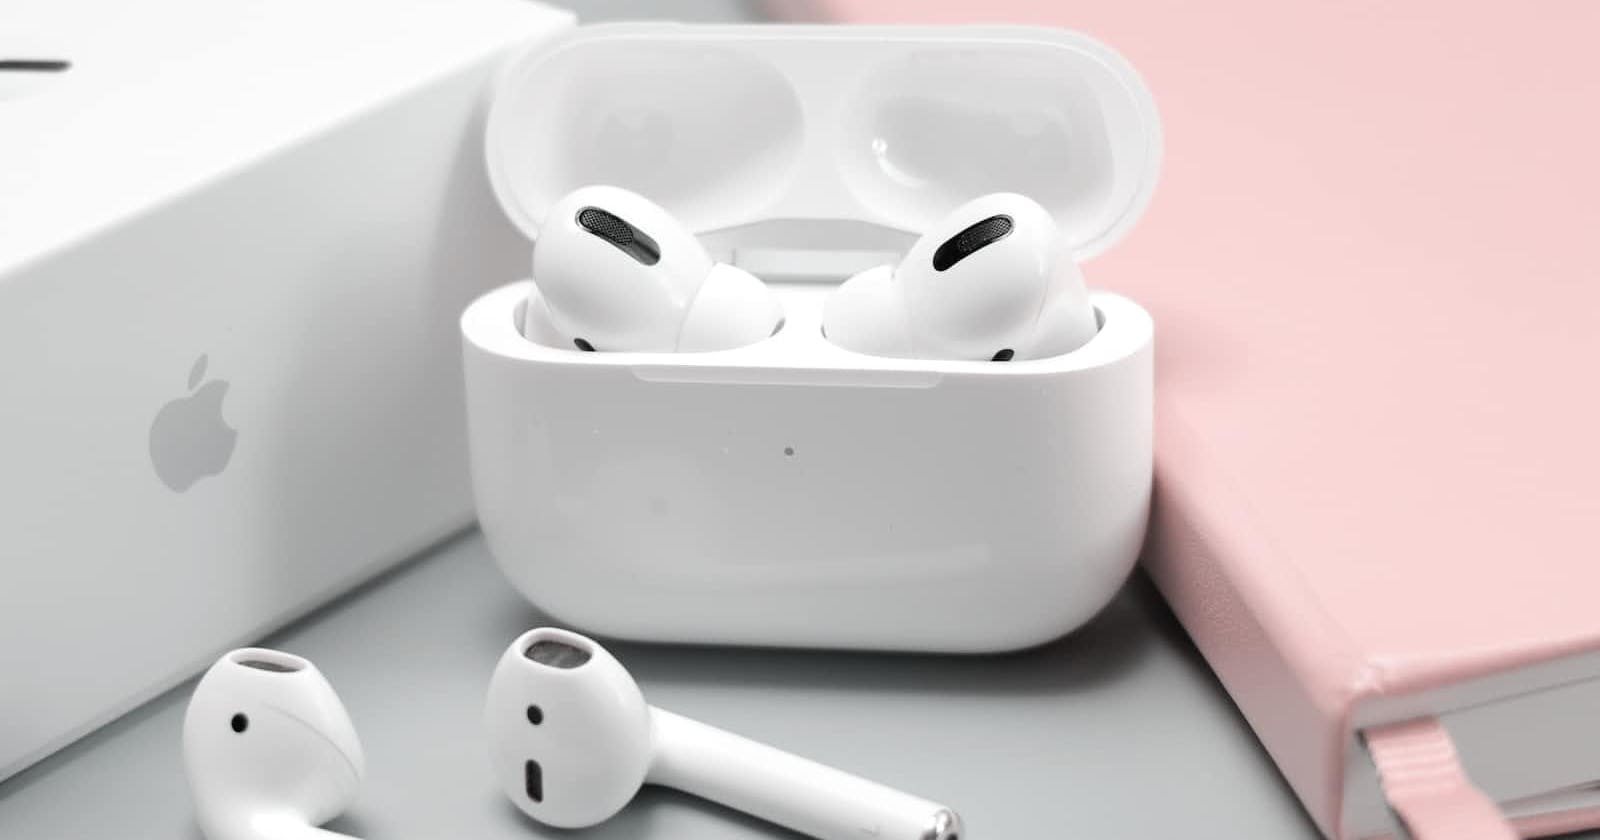 Why Your Air Pods Will Work on an Android Device